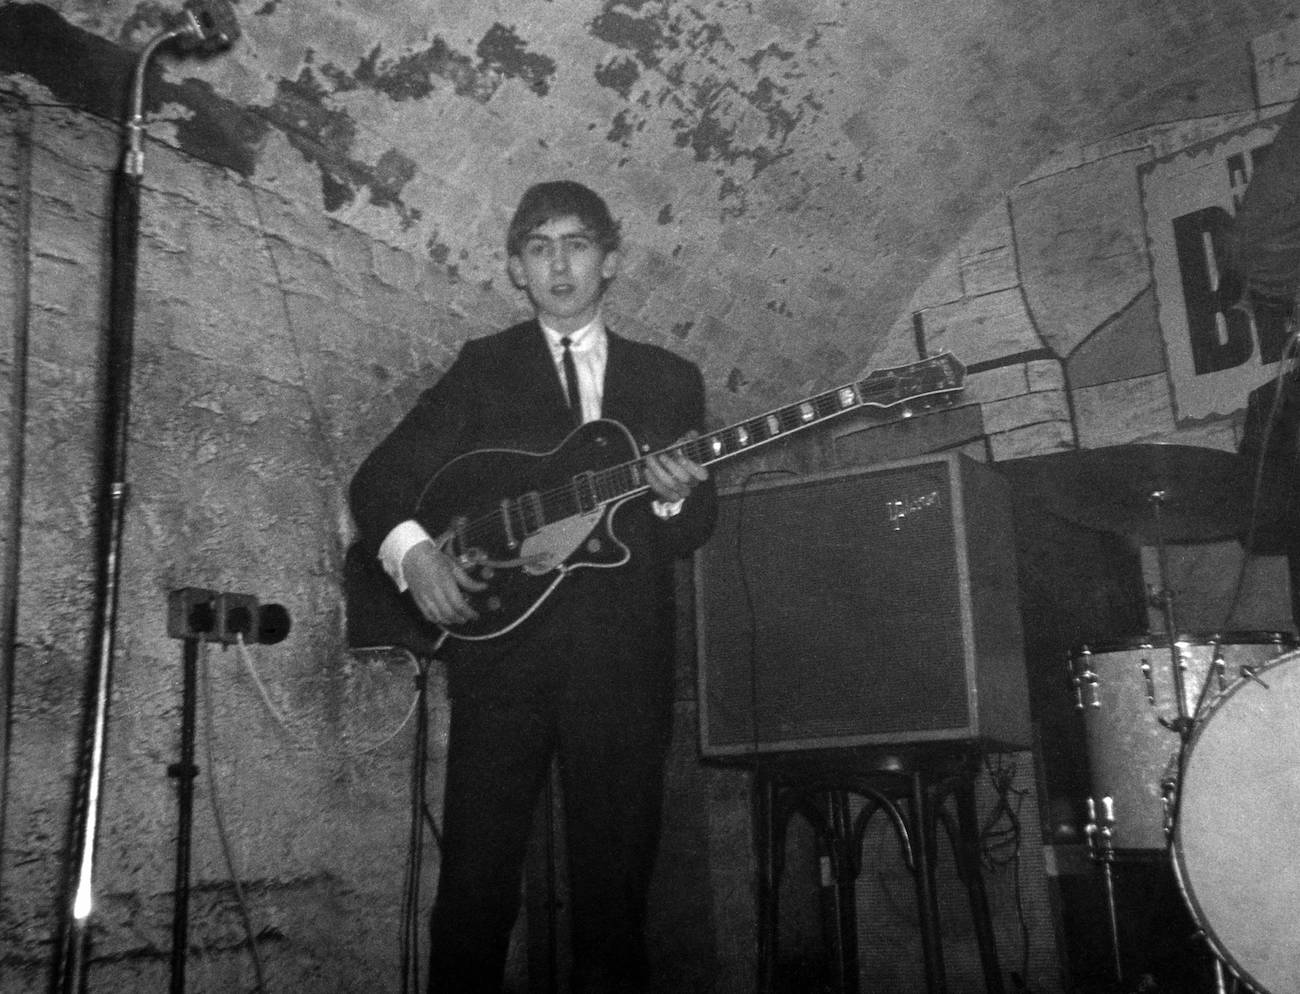 George Harrison holding his guitar before The Beatles performed at The Cavern Club.